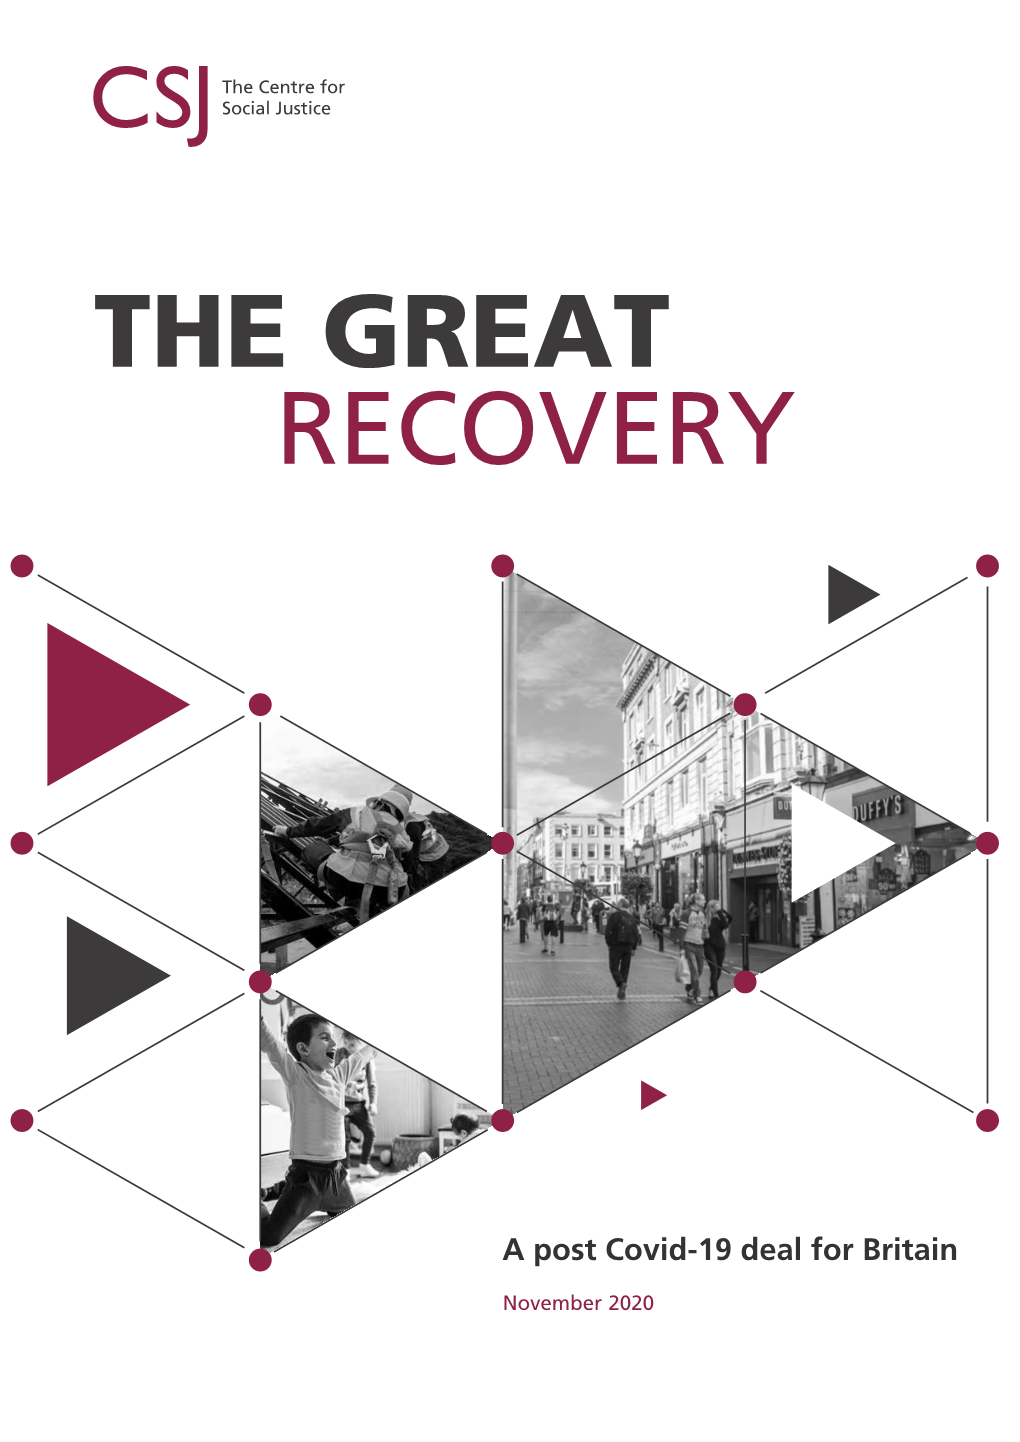 The Great Recovery a Post Covid-19 Deal for Britain © the Centre for Social Justice, 2020